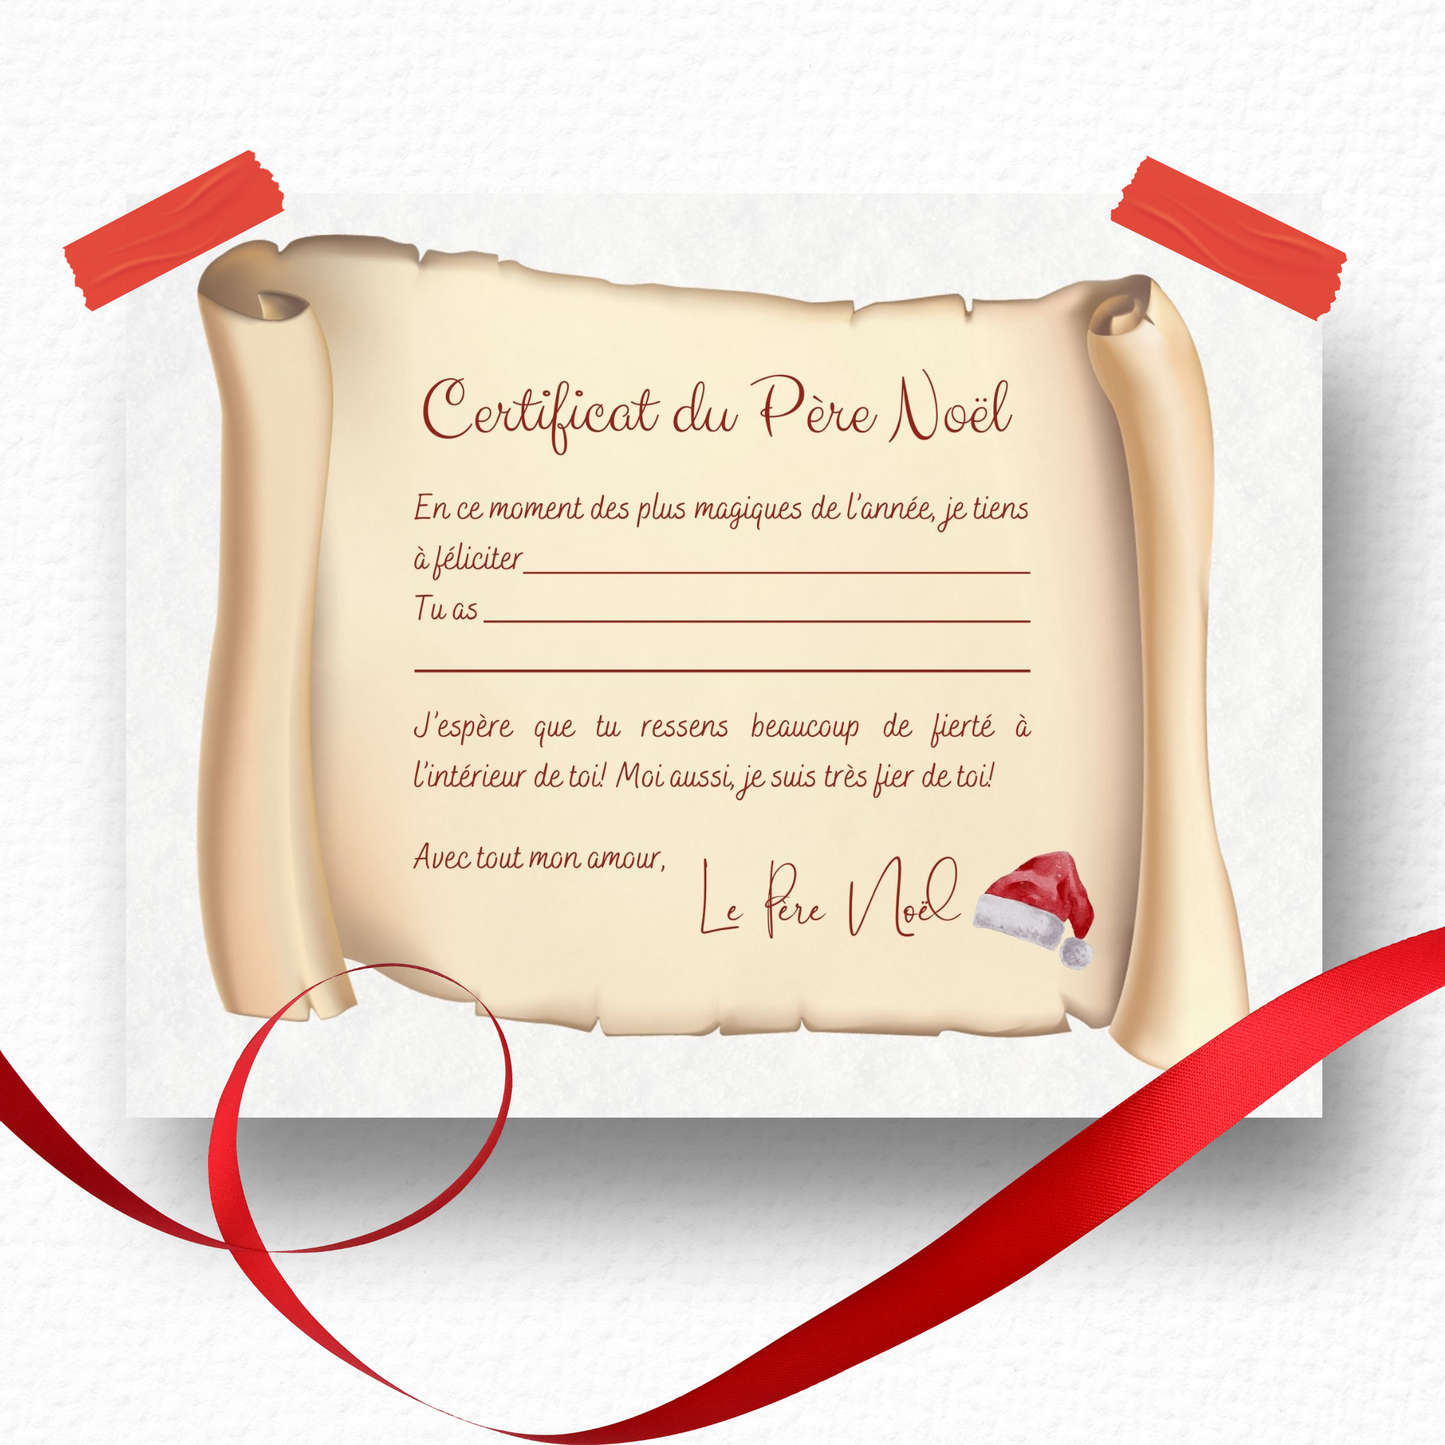 Certificate from Santa Claus